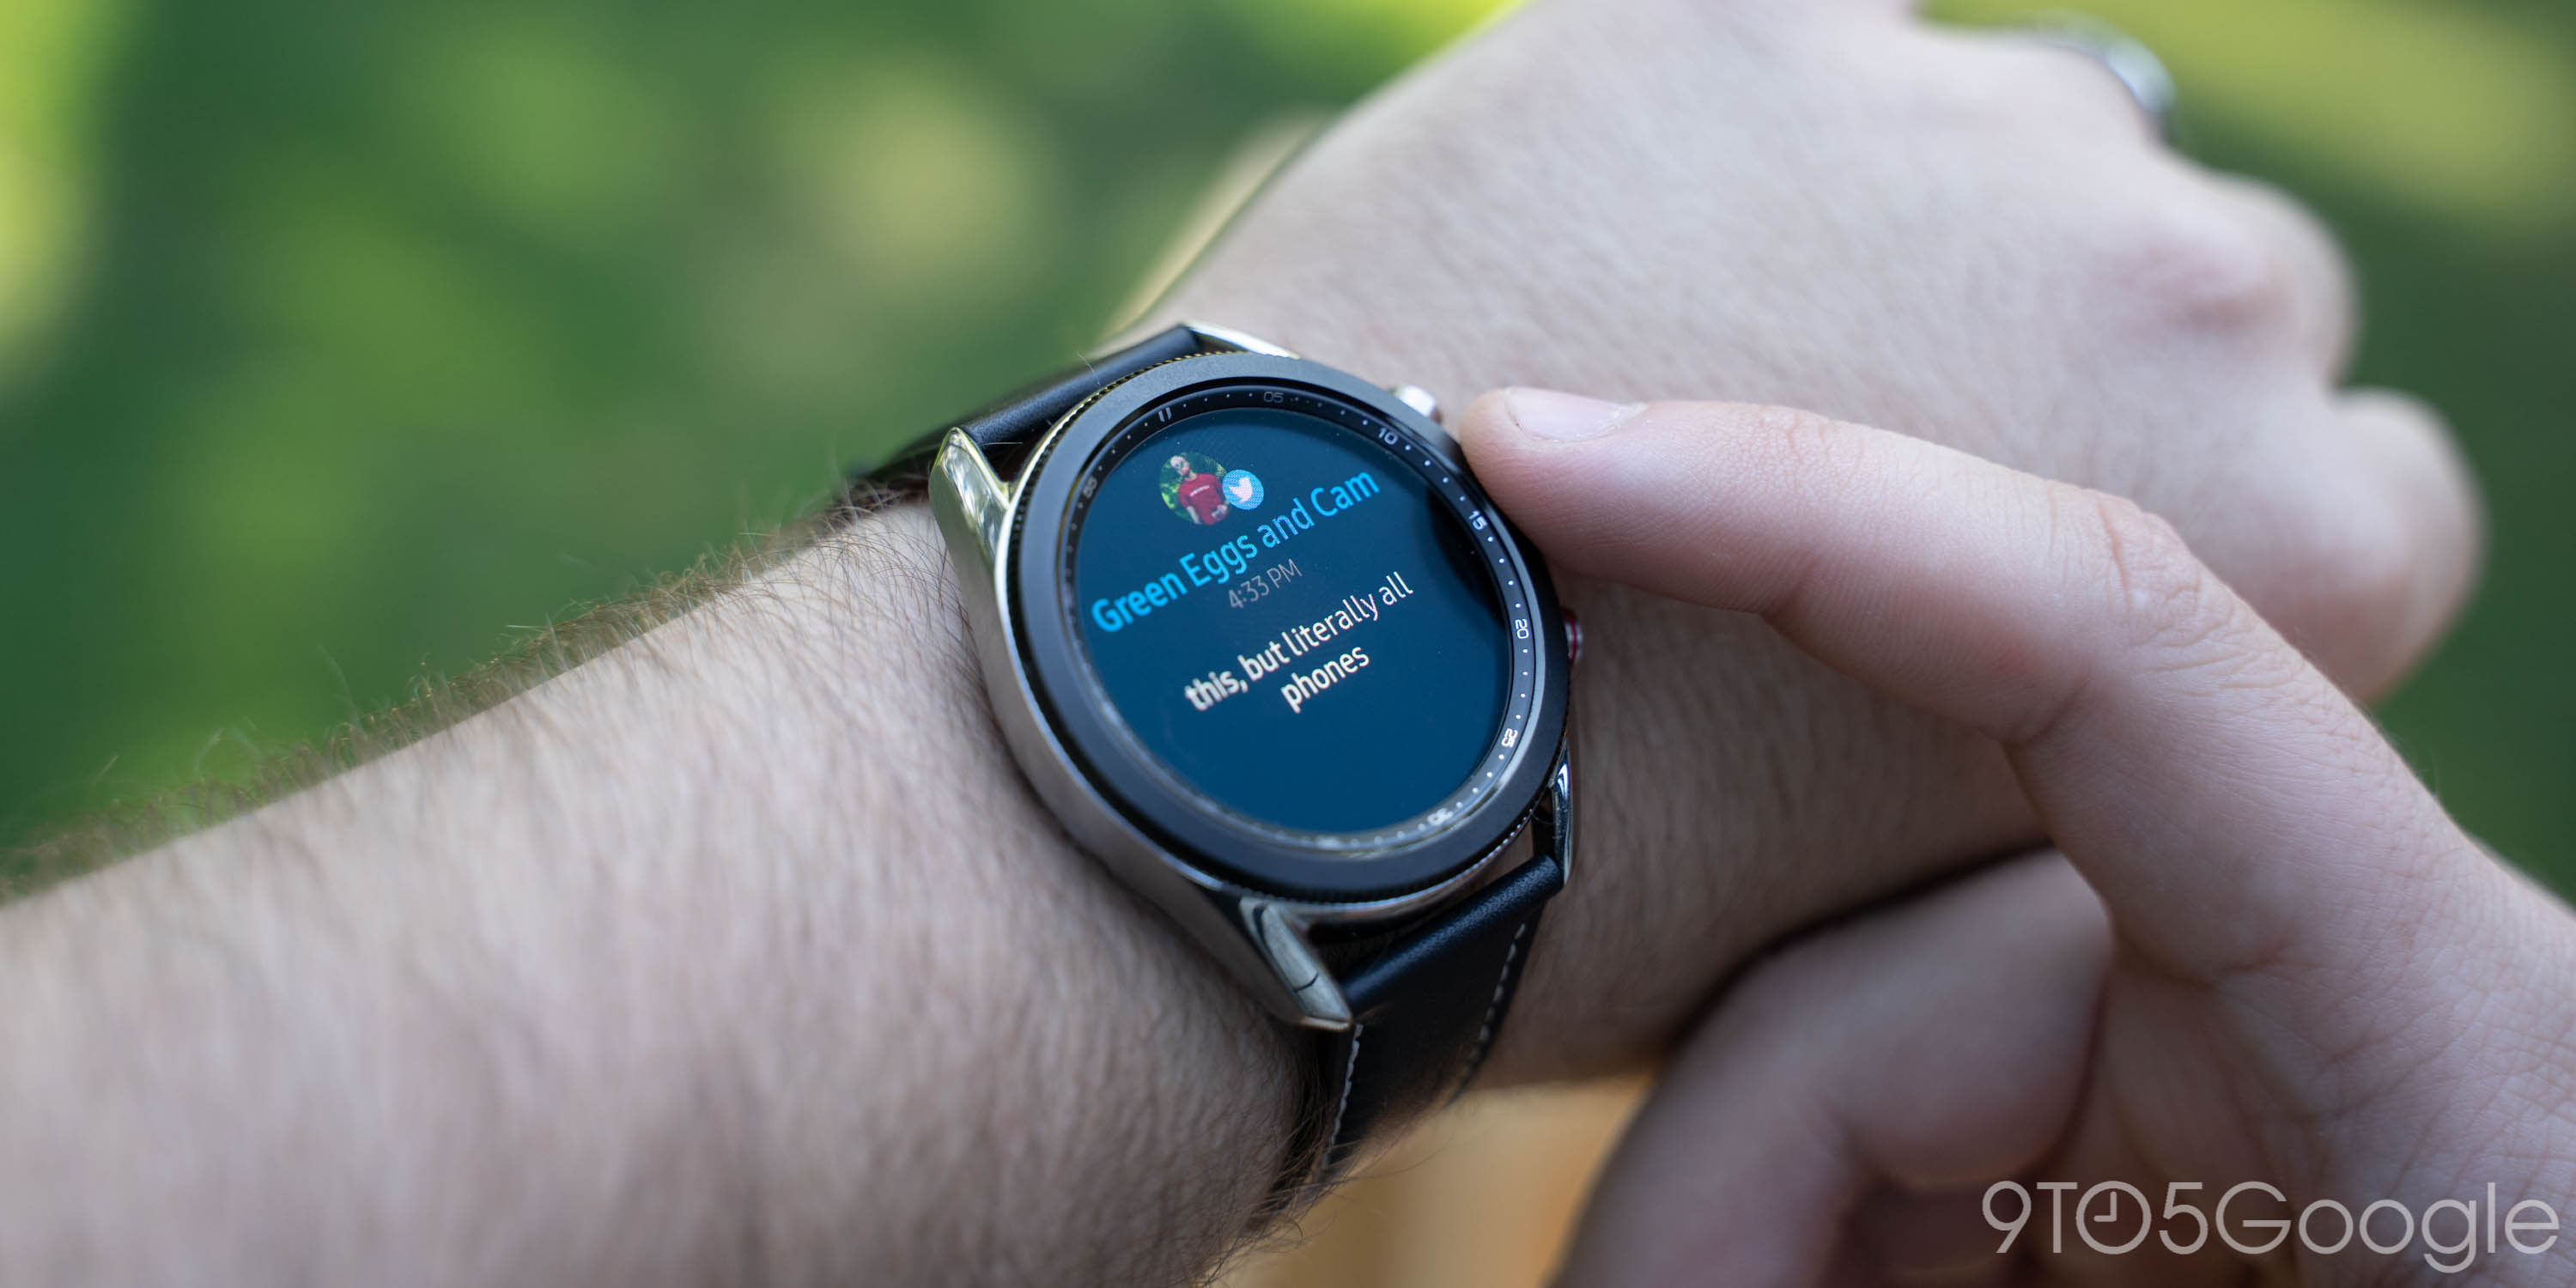 Forstyrre Evne solsikke Samsung to unveil 'new era of smartwatch experiences' - 9to5Google